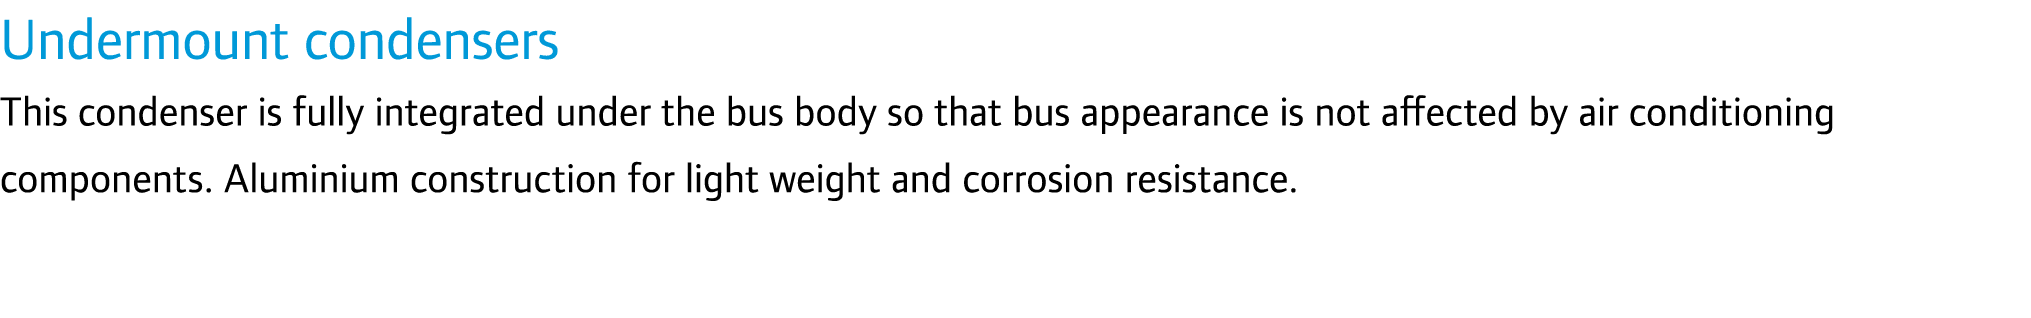 Undermount condensers This condenser is fully integrated under the bus body so that bus appearance is not affected by...